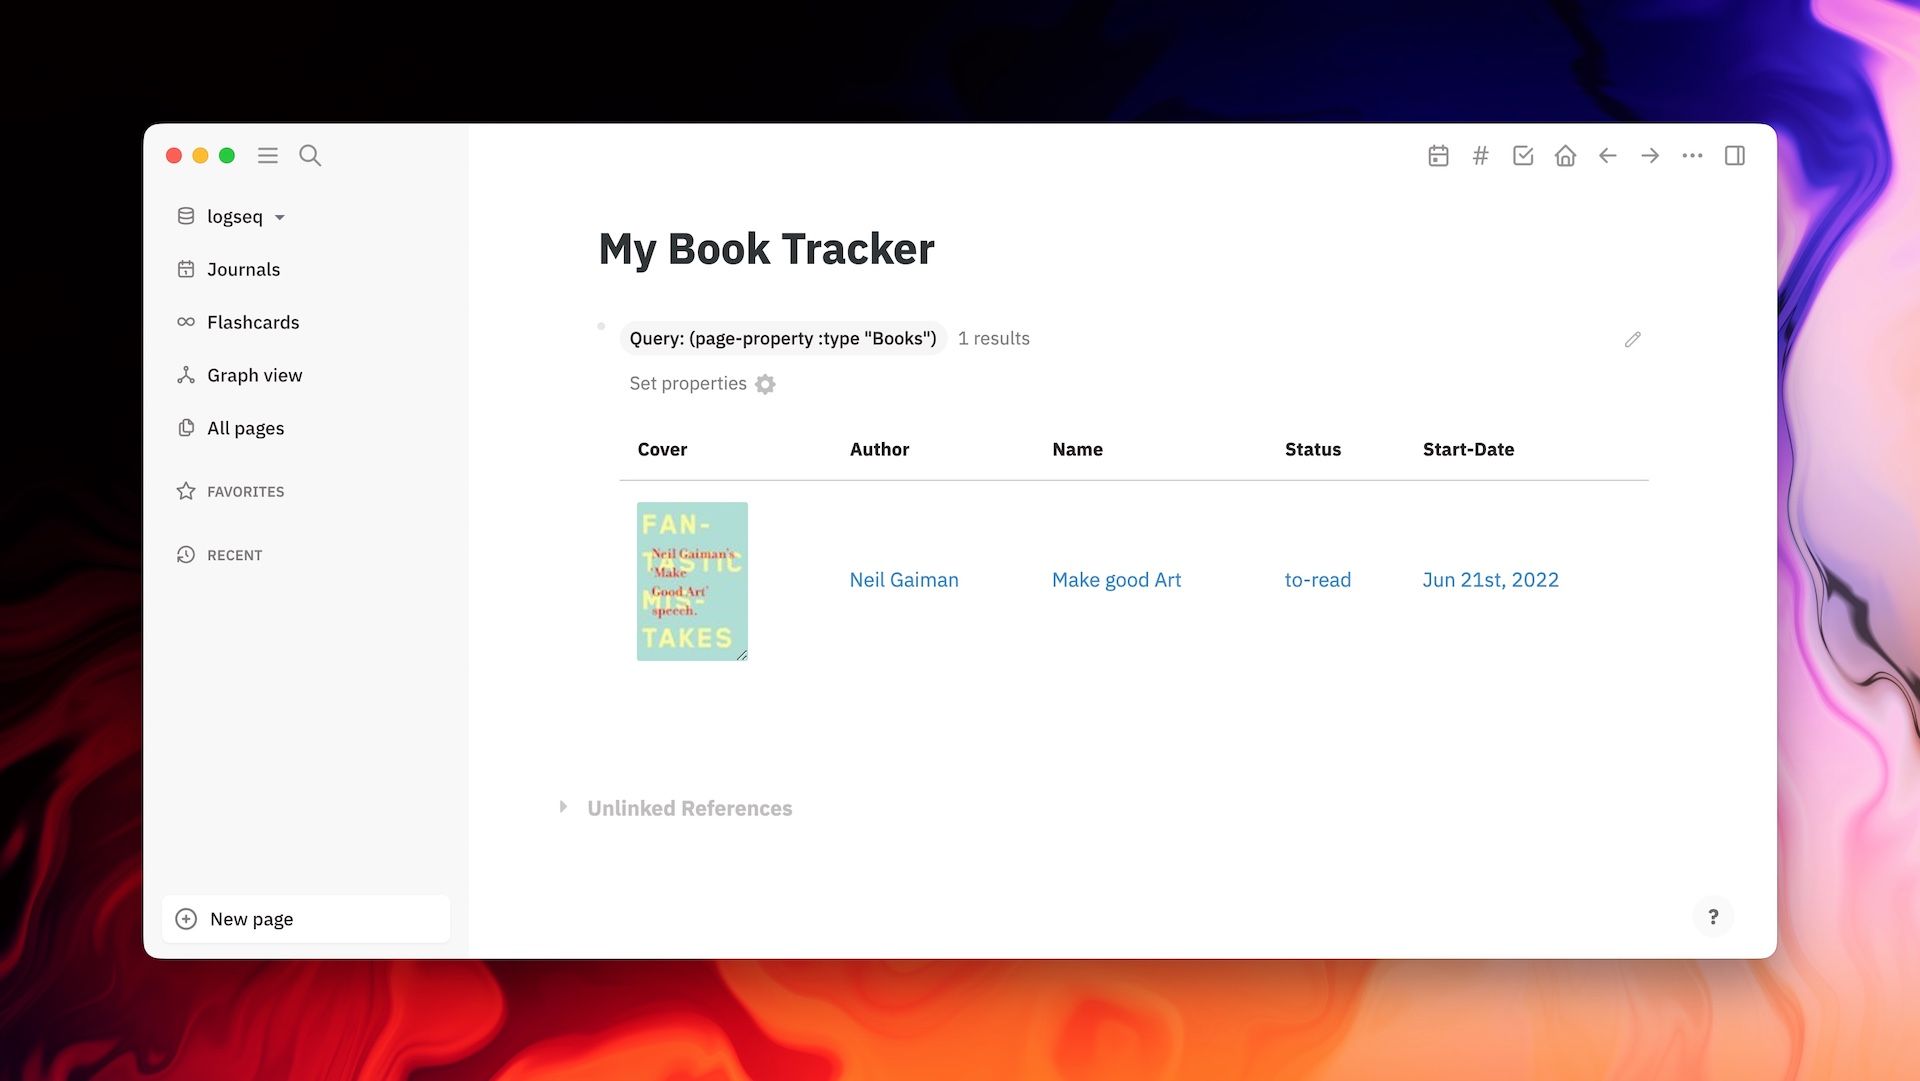 How to Create a Book Tracker in Logseq to Keep Track of Books You Read